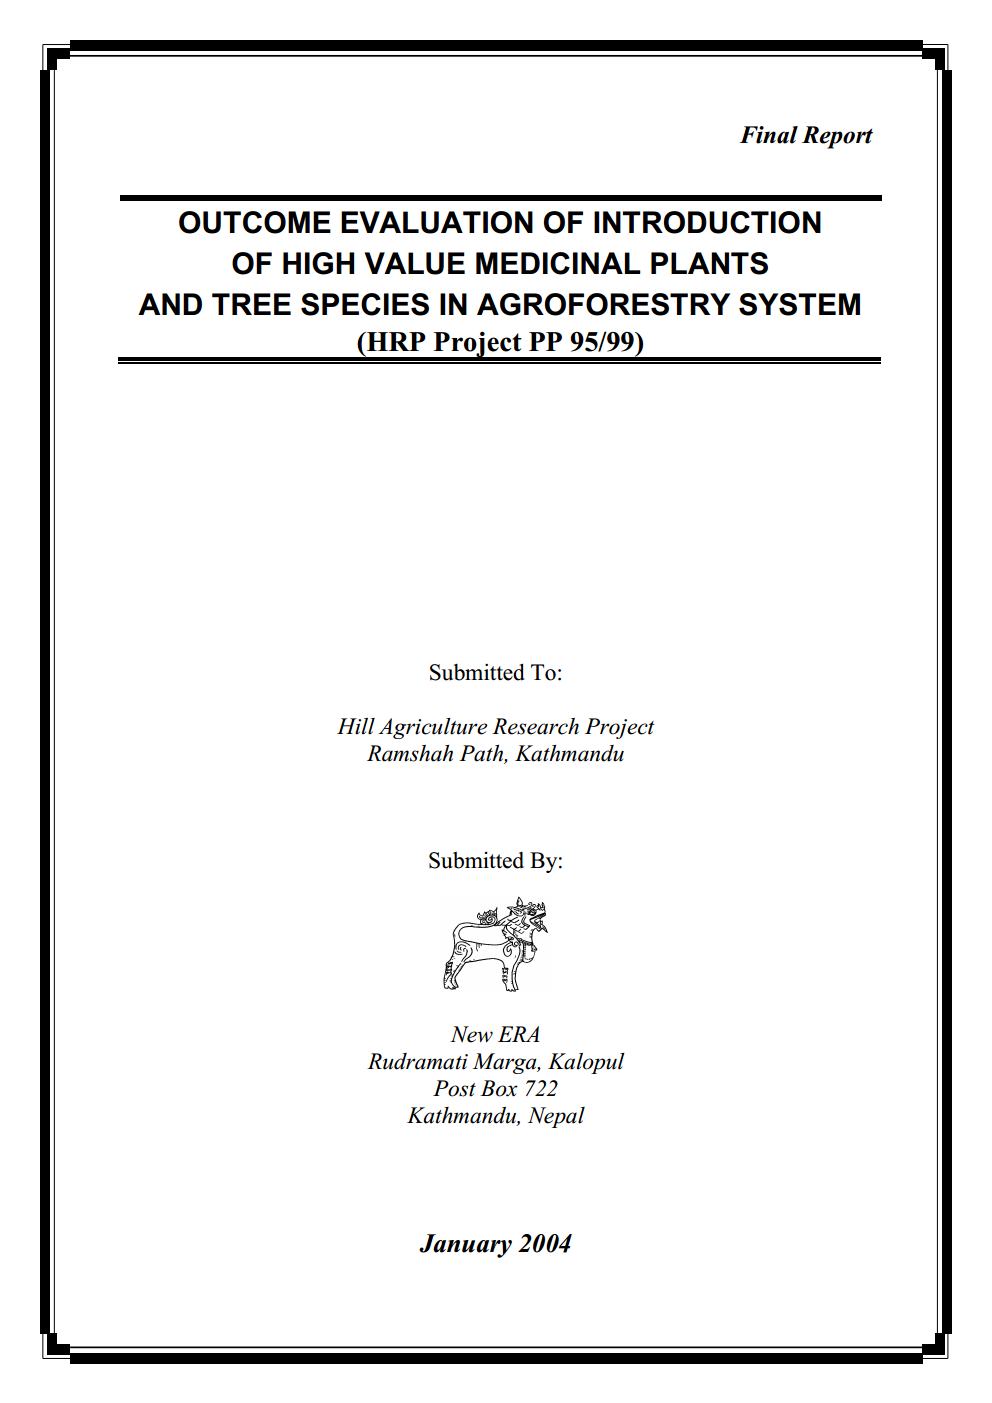 Outcome Evaluation of Introduction of High Value Medicinal Plants and Tree Species in Agroforestry System